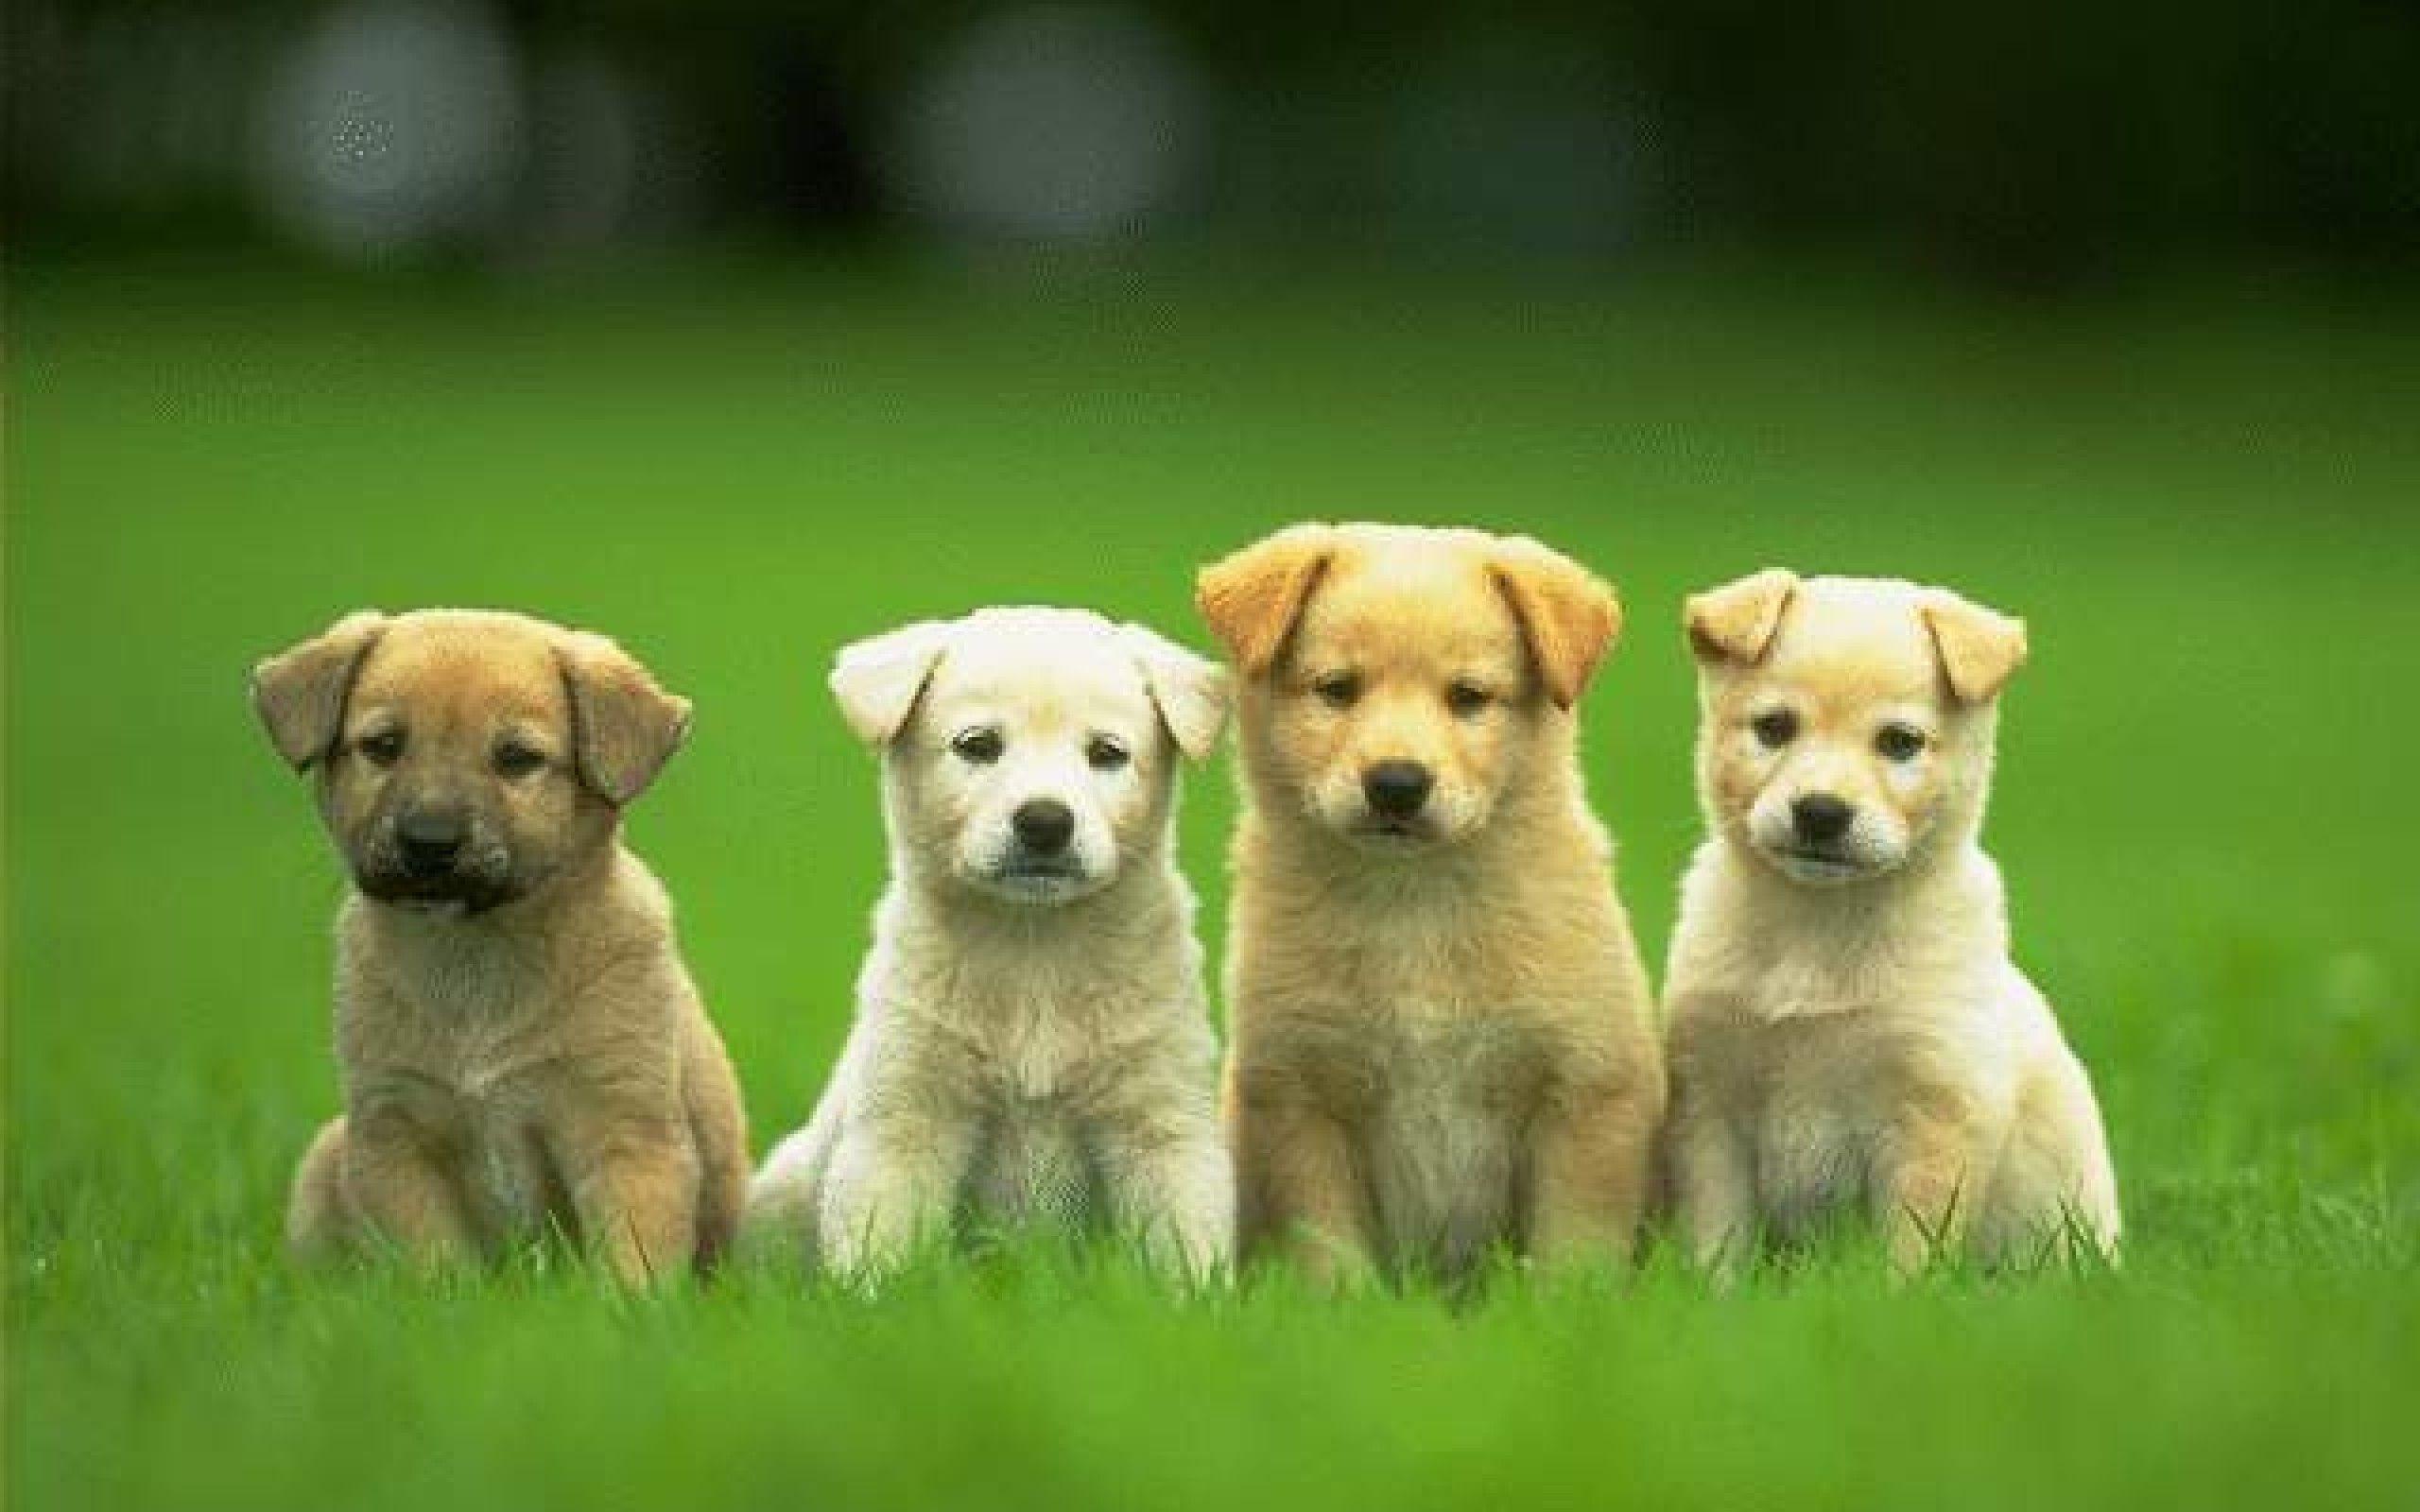 Small Cute Dogs Wallpapers - Top Free Small Cute Dogs Backgrounds ...